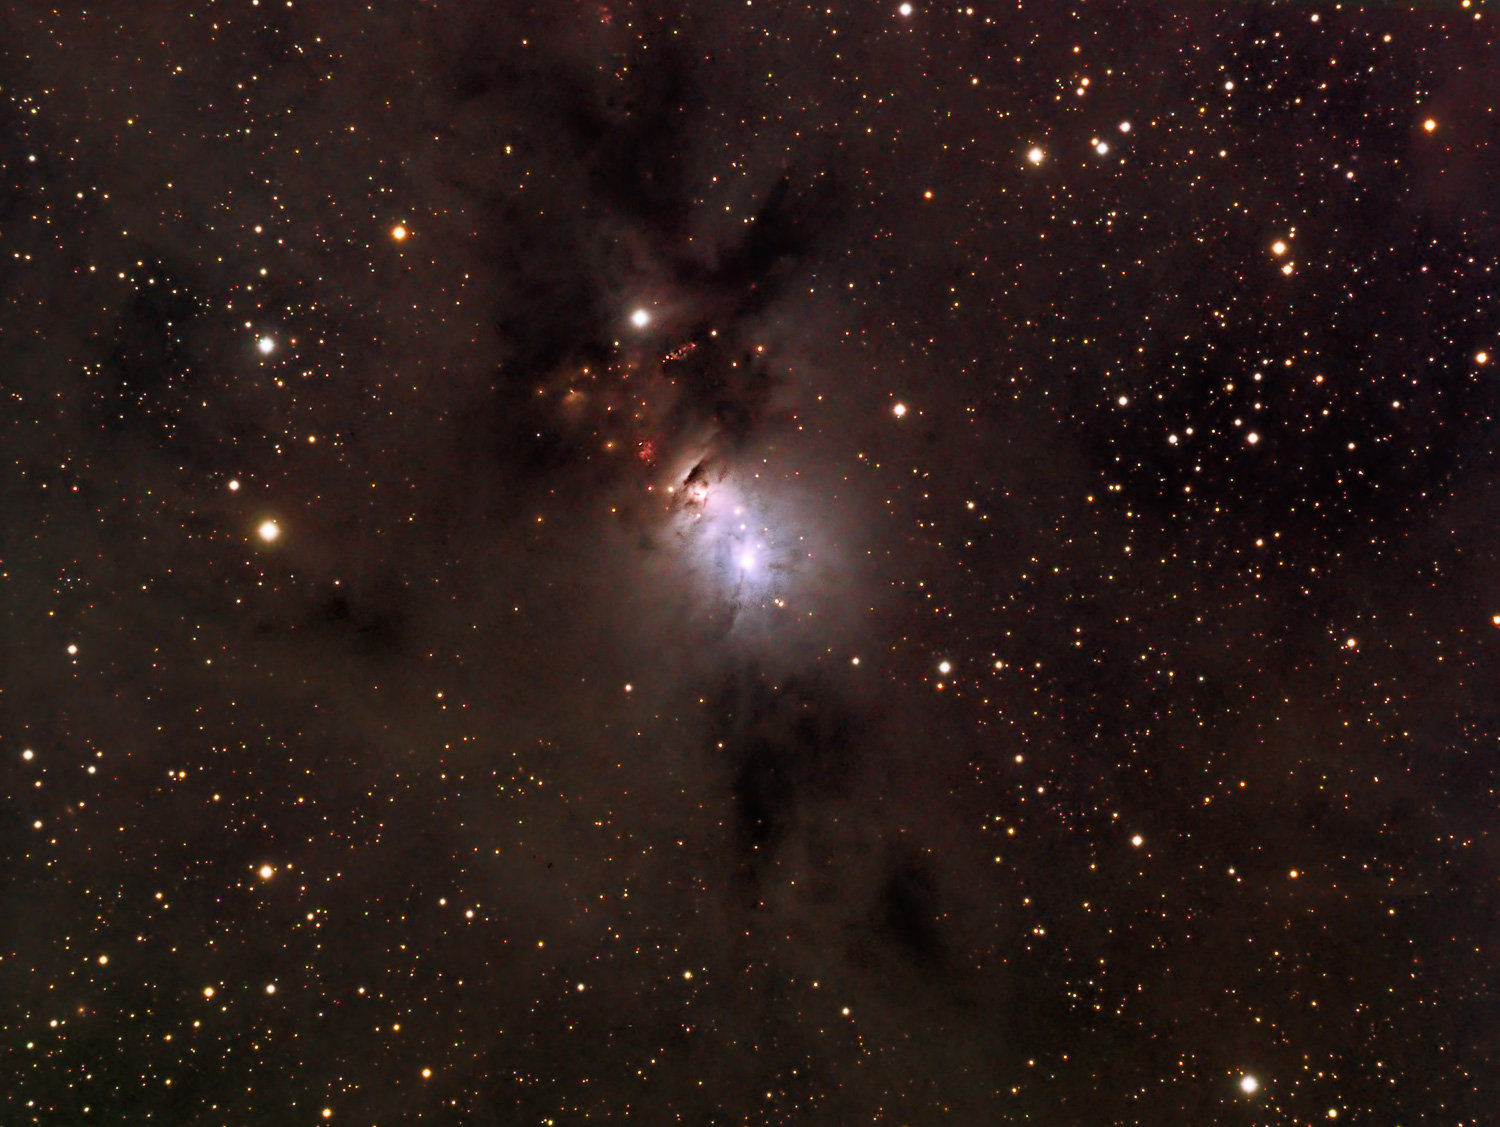 w20110205_ngc1333_lrgb-ps2ps1-v2-combine-scaled.jpg